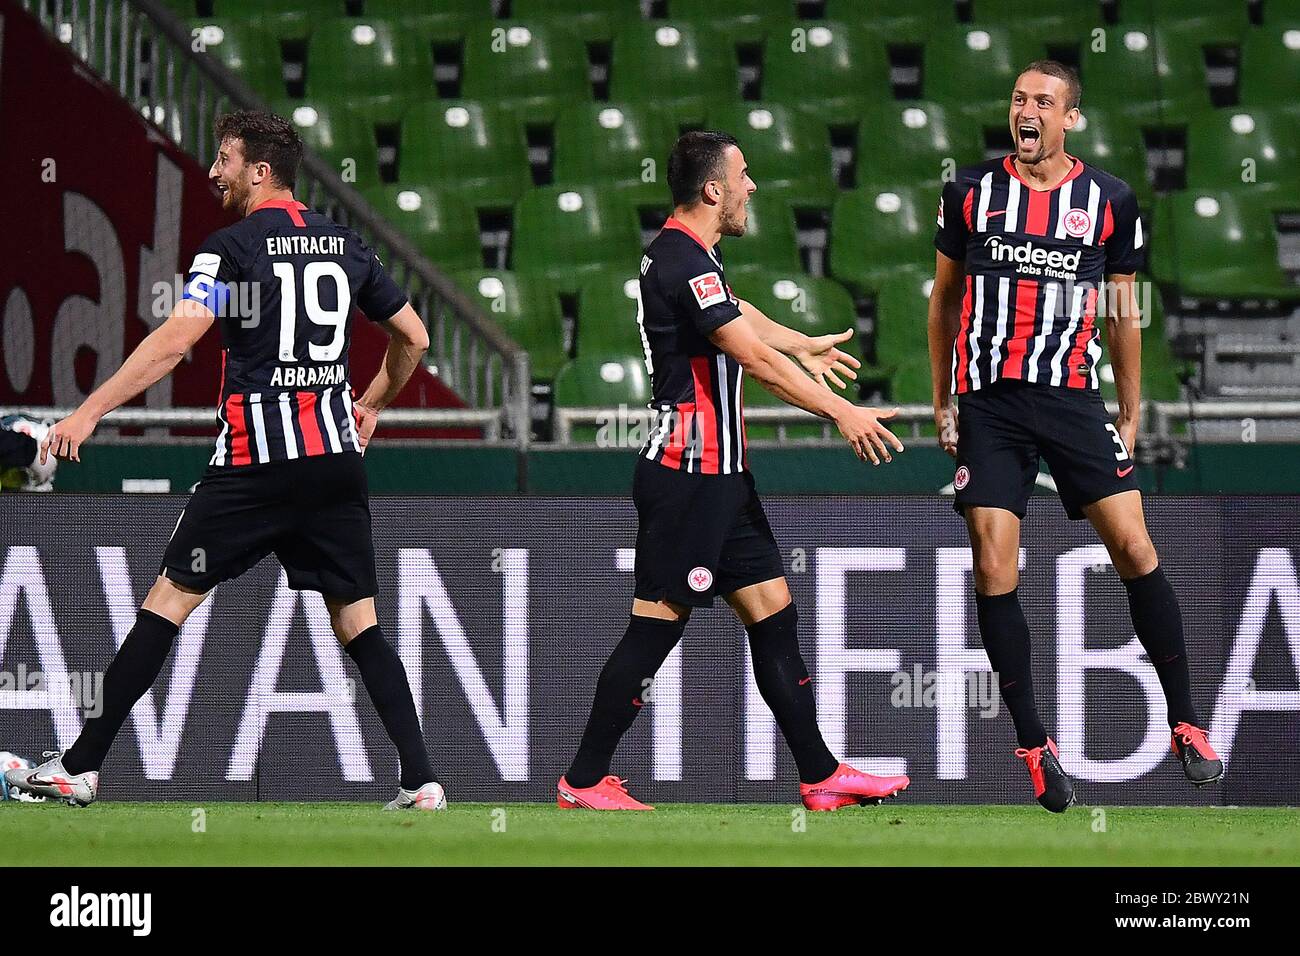 Bremen, Germany. 03rd June, 2020. Football: Bundesliga, Werder Bremen - Eintracht Frankfurt at the wohninvest Weser Stadium. Frankfurt's Stefan IIsanker (r) celebrates his goal of 0:2 with Filip Kostic (M) and David Abraham. Credit: Stuart Franklin/Getty Images Europe/Pool/dpa - IMPORTANT NOTE: In accordance with the regulations of the DFL Deutsche Fußball Liga and the DFB Deutscher Fußball-Bund, it is prohibited to exploit or have exploited in the stadium and/or from the game taken photographs in the form of sequence images and/or video-like photo series./dpa/Alamy Live News Stock Photo